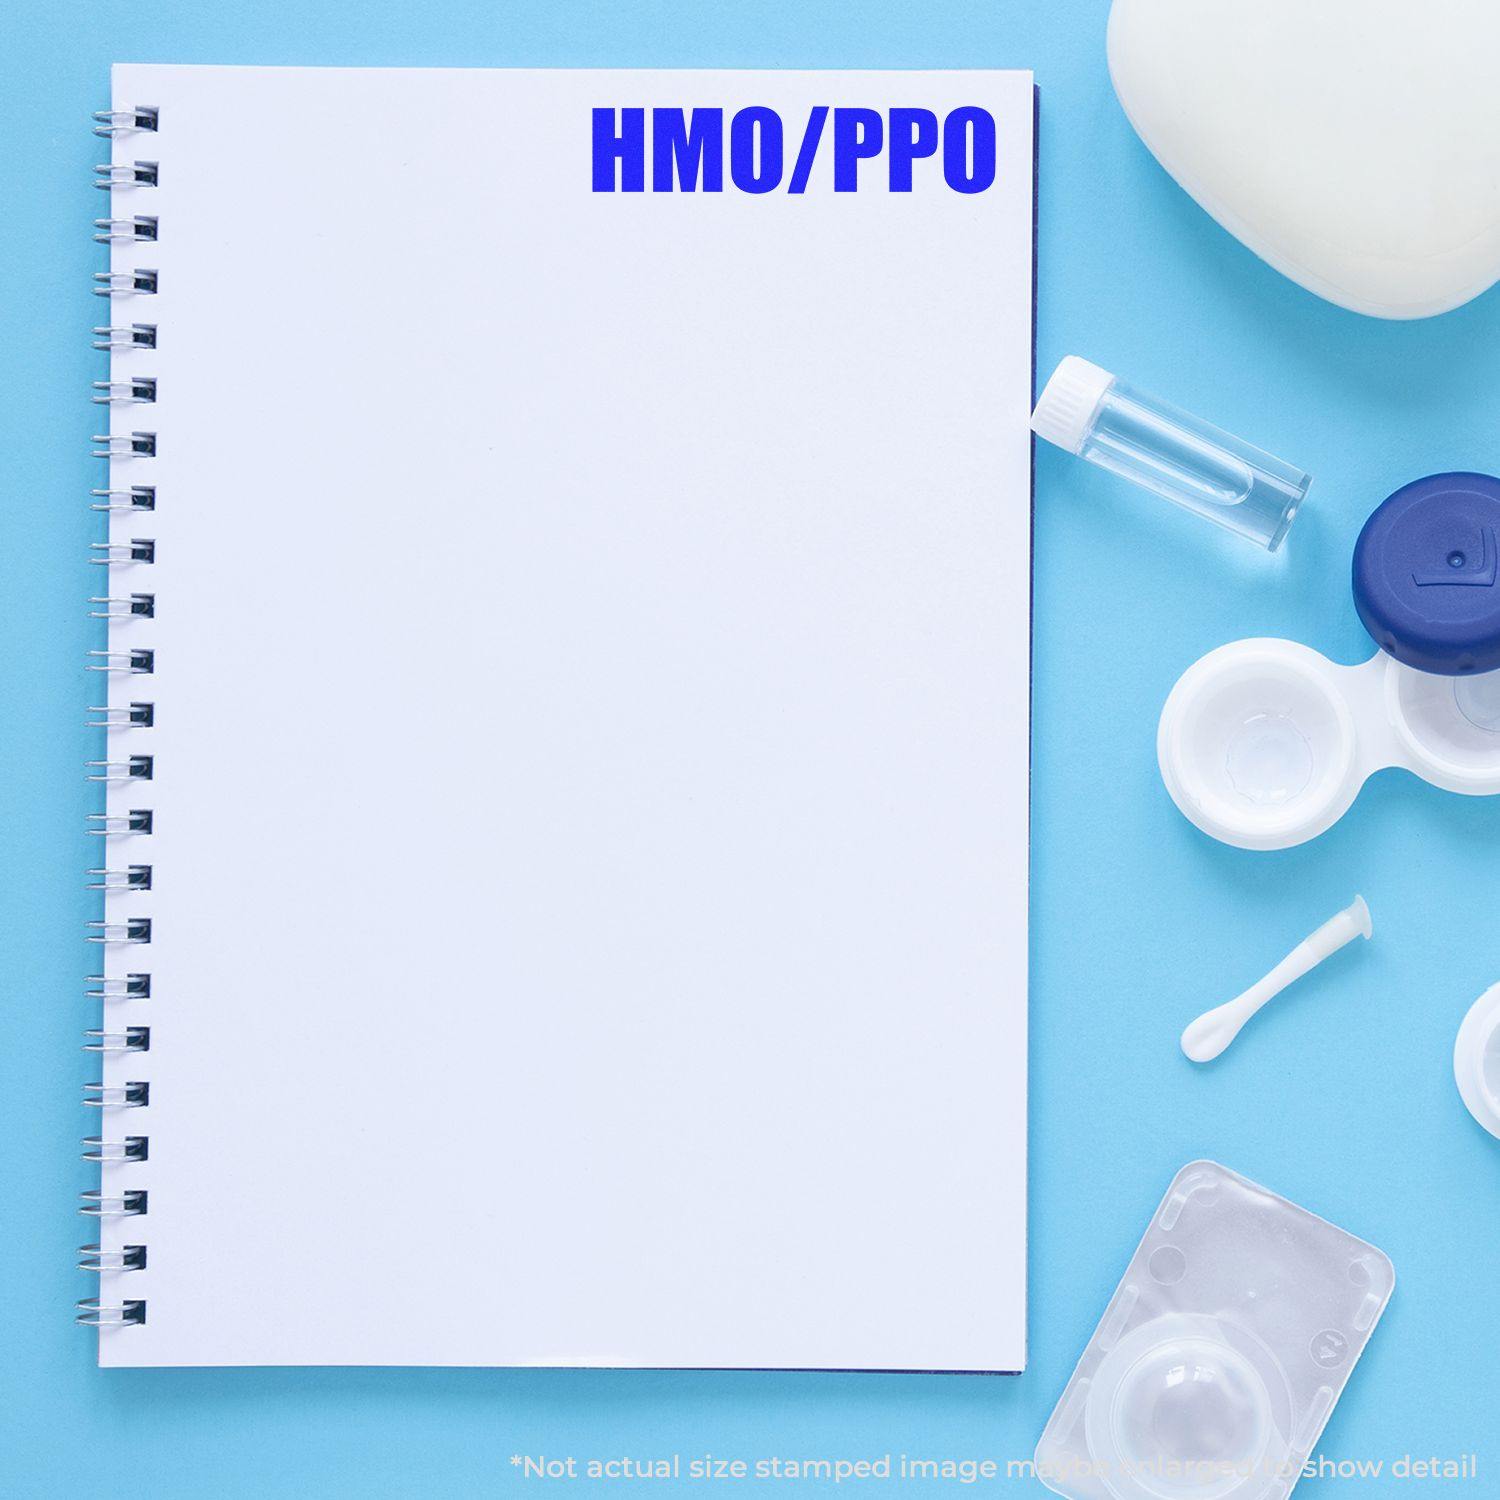 A self-inking stamp with a stamped image showing how the text "HMO/PPO" is displayed after stamping.